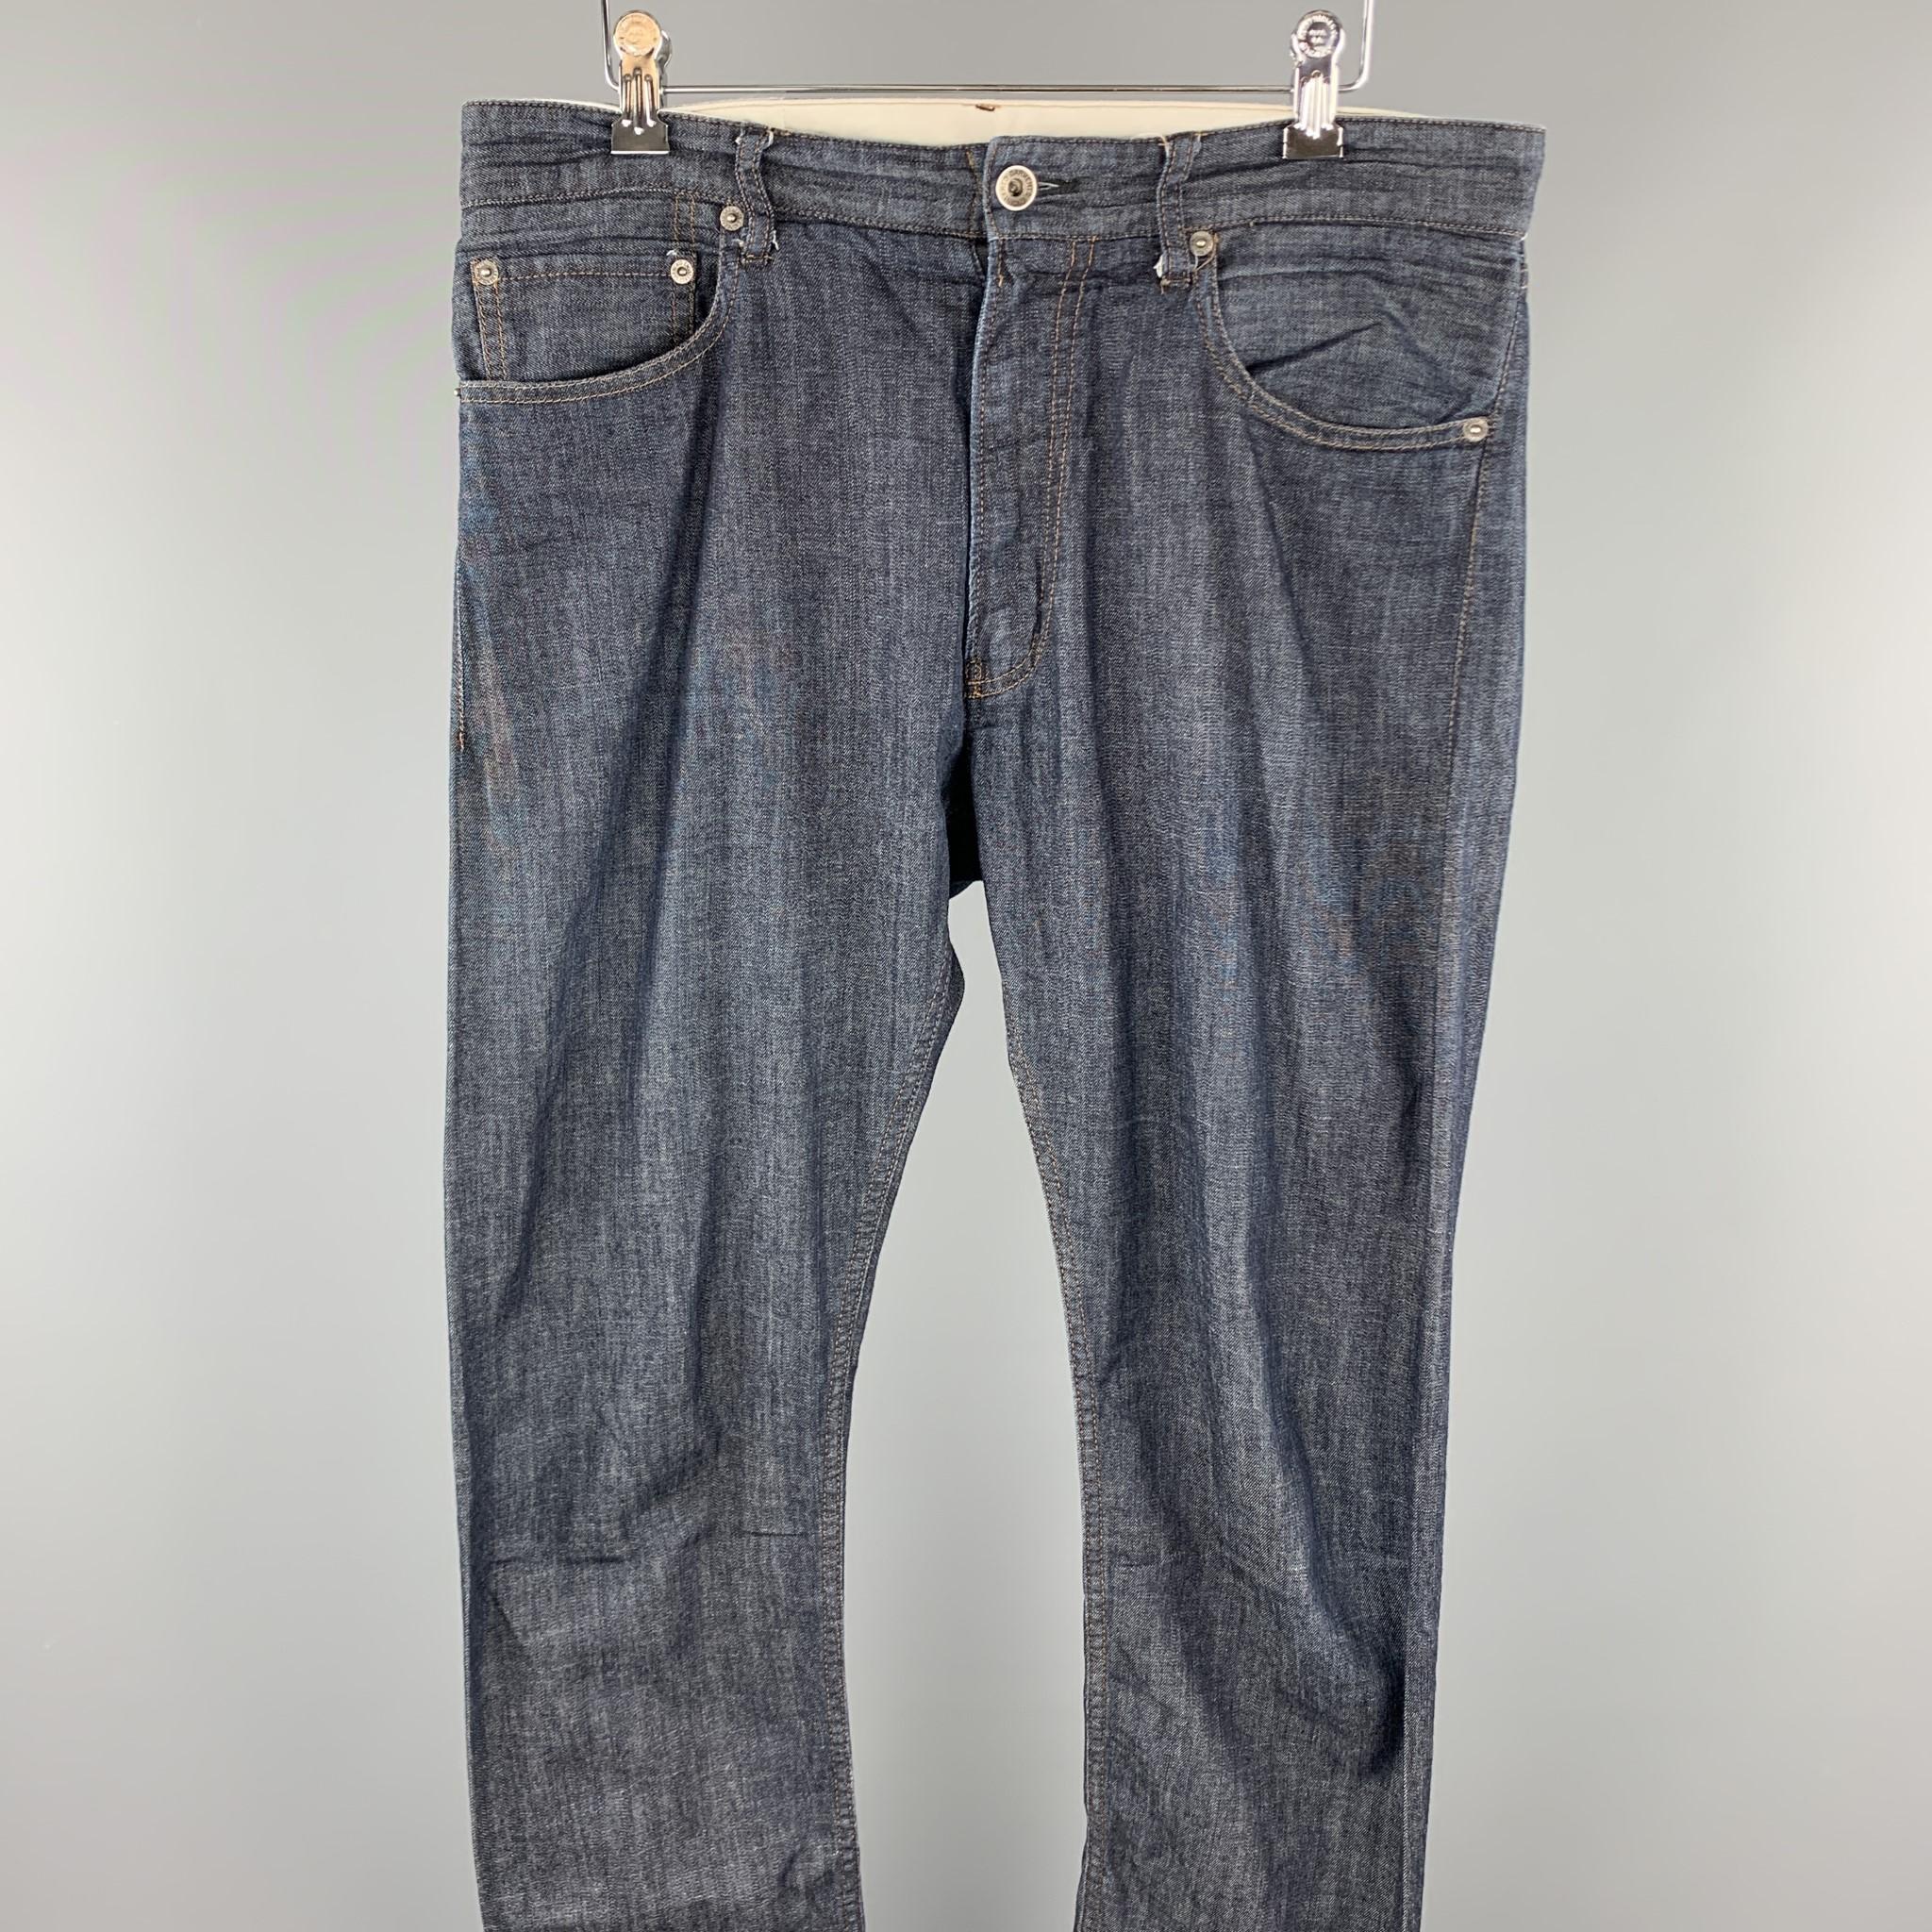 ENGINEERED GARMENTS jeans comes in a indigo cotton featuring contrast stitching and a zip fly closure. Made in USA.

Very Good Pre-Owned Condition.
Marked: US 32

Measurements:

Waist: 34 in.
Rise: 10 in. 
Inseam: 32 in. 